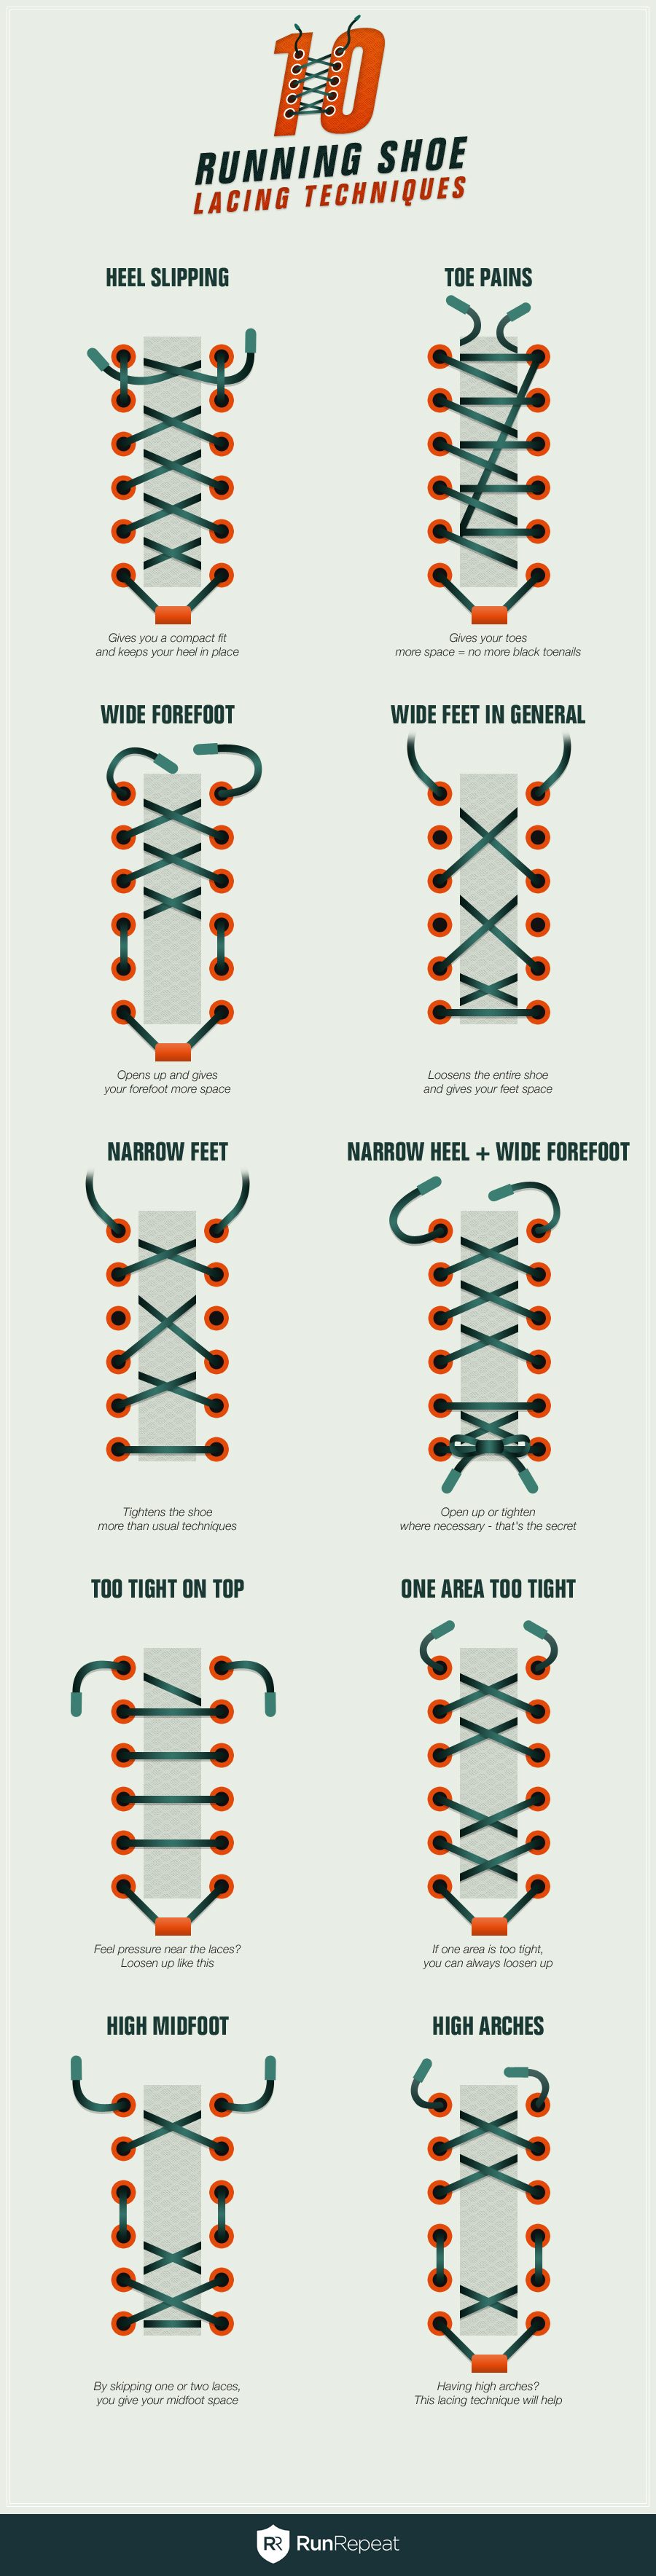 Top 10 Running Shoe Lacing Techniques (Infographic) | RunRepeat